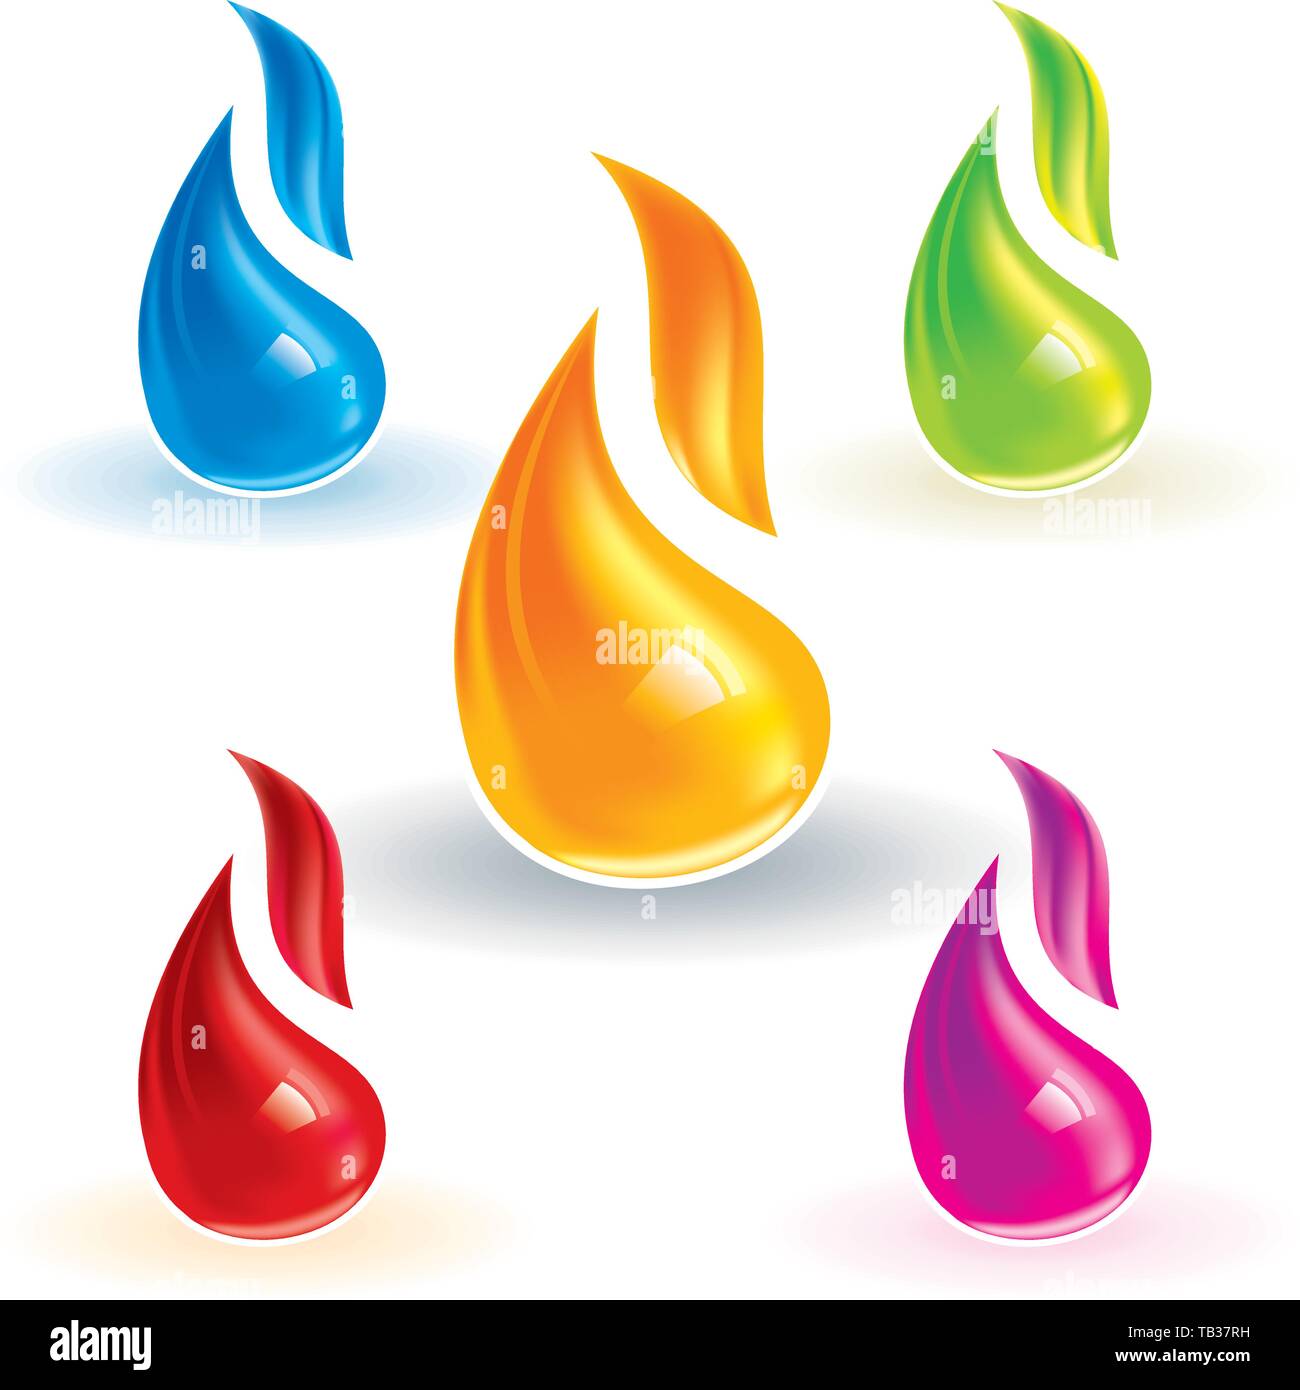 Vector illustration. Simple and clean flame icon in assorted colors. Stock Vector